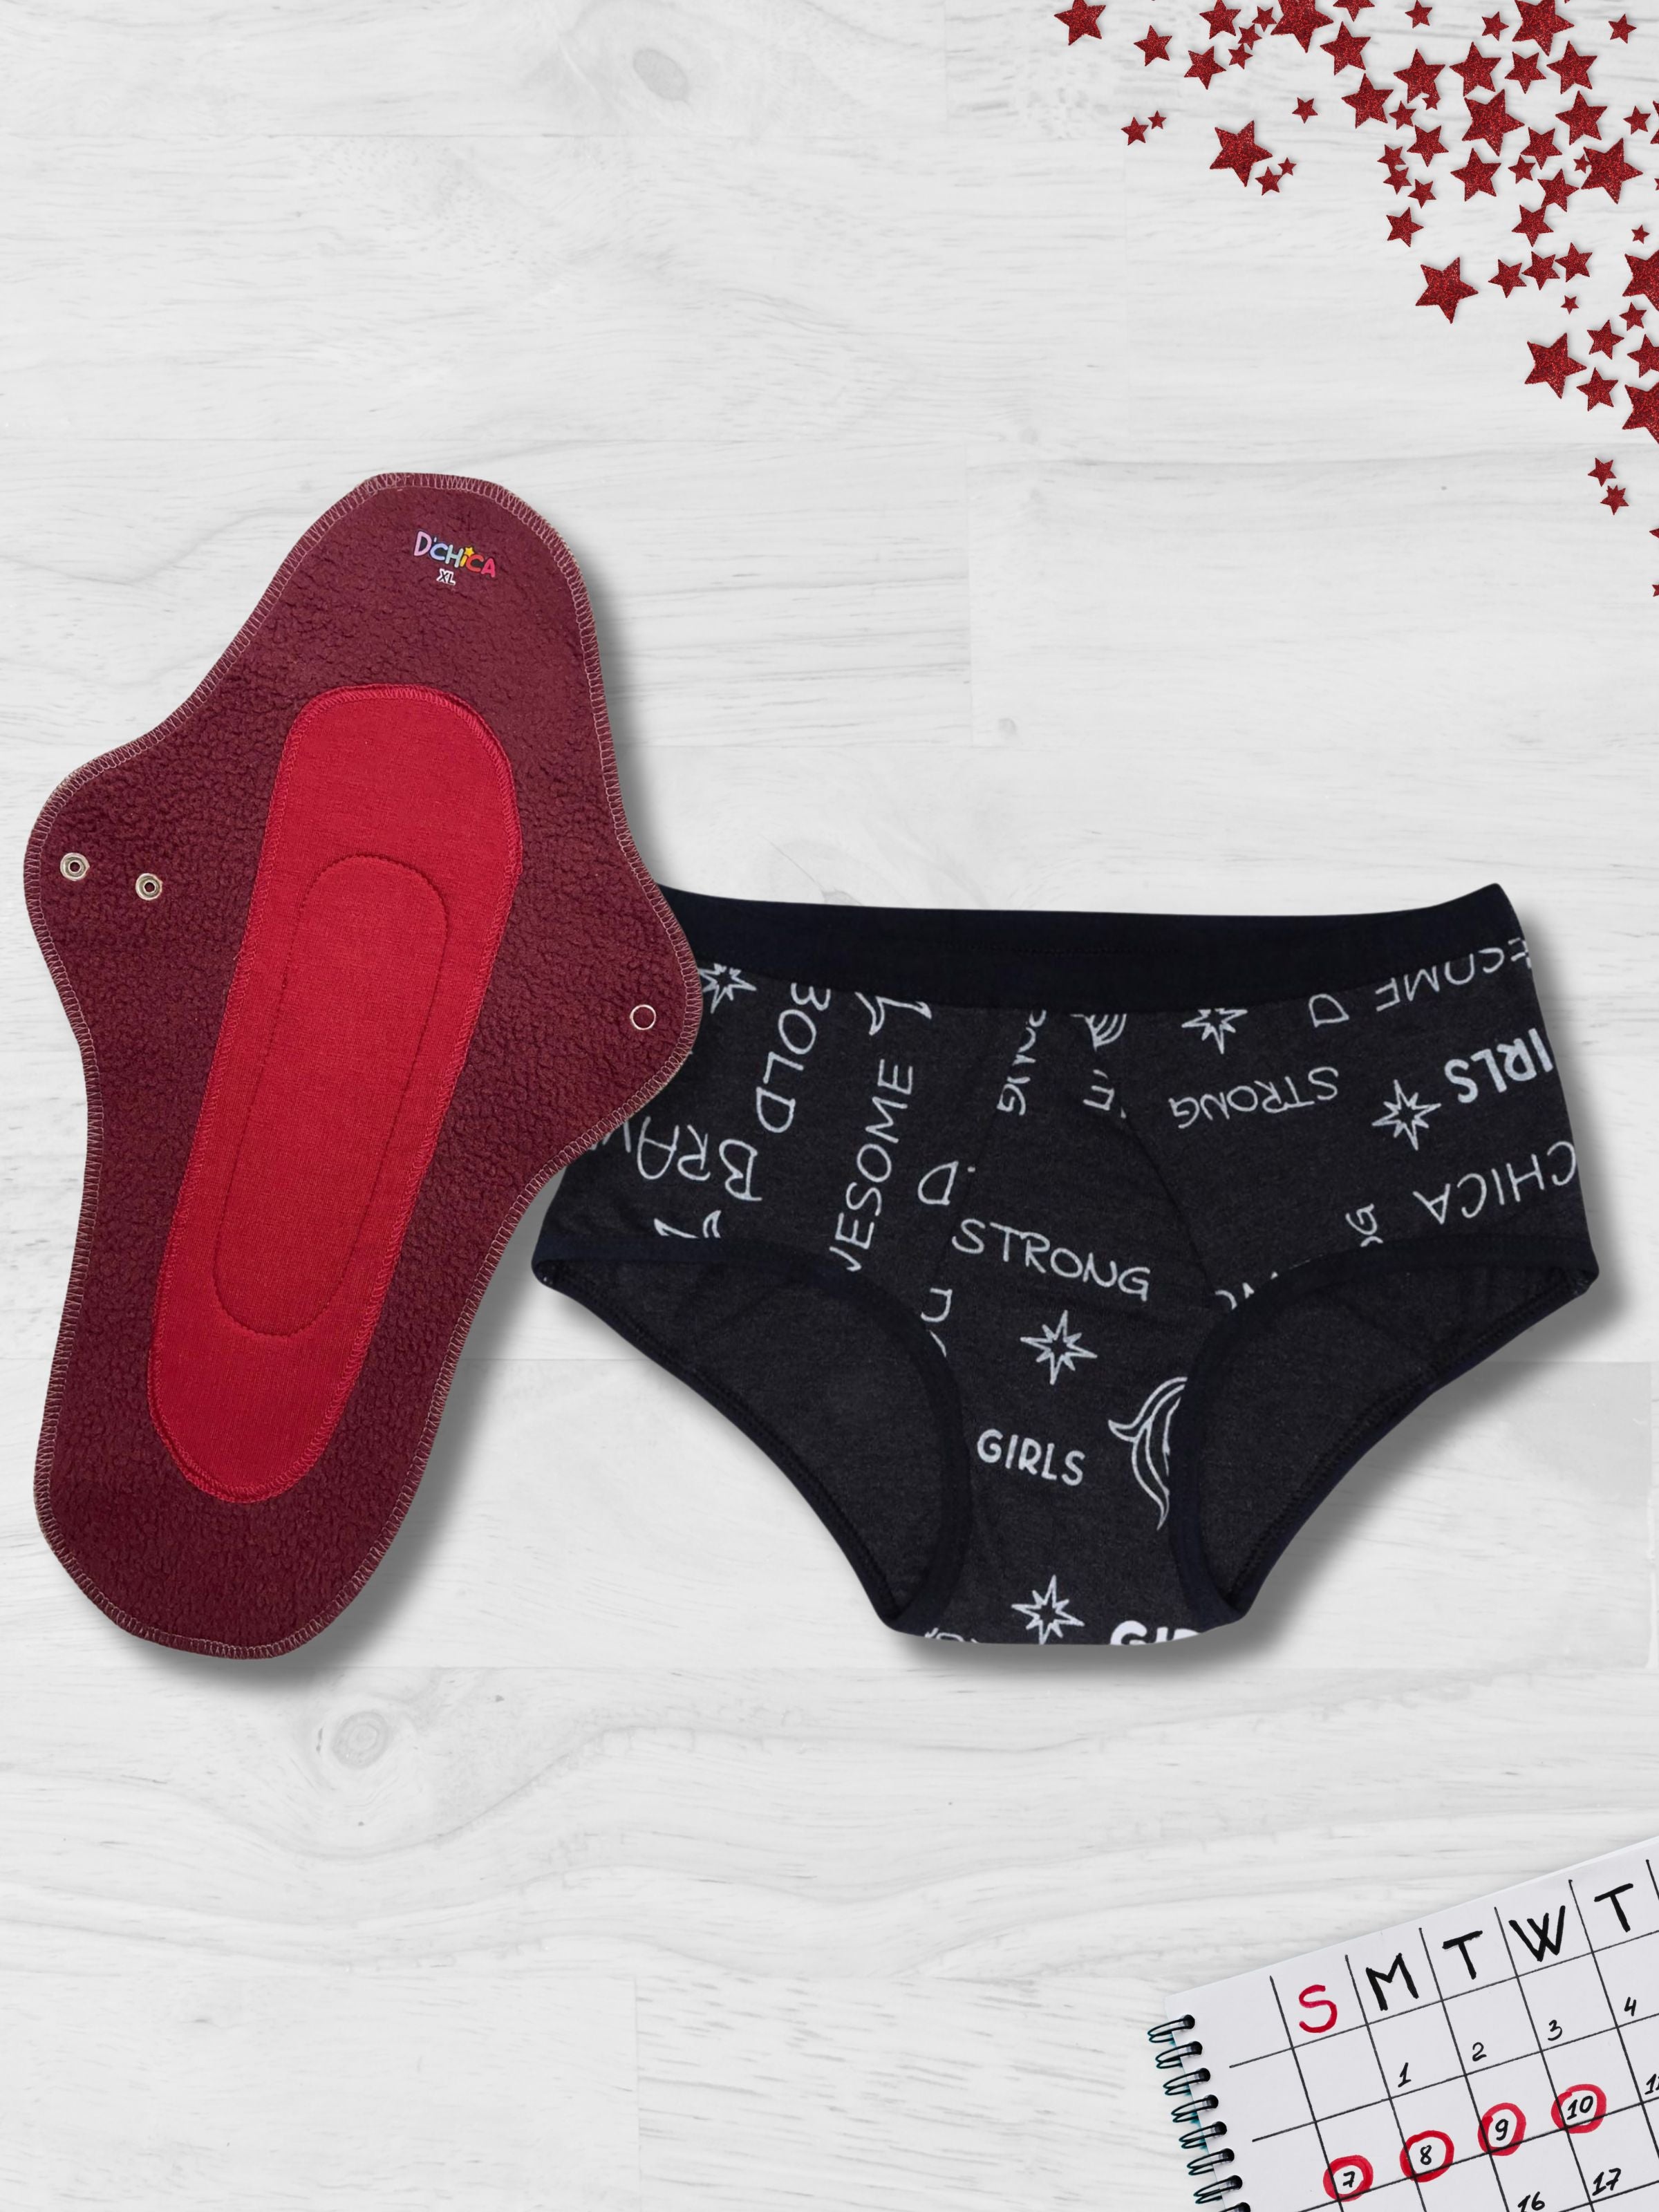 Stay Comfortable and Confident with D'chica Period Panties – D'chica